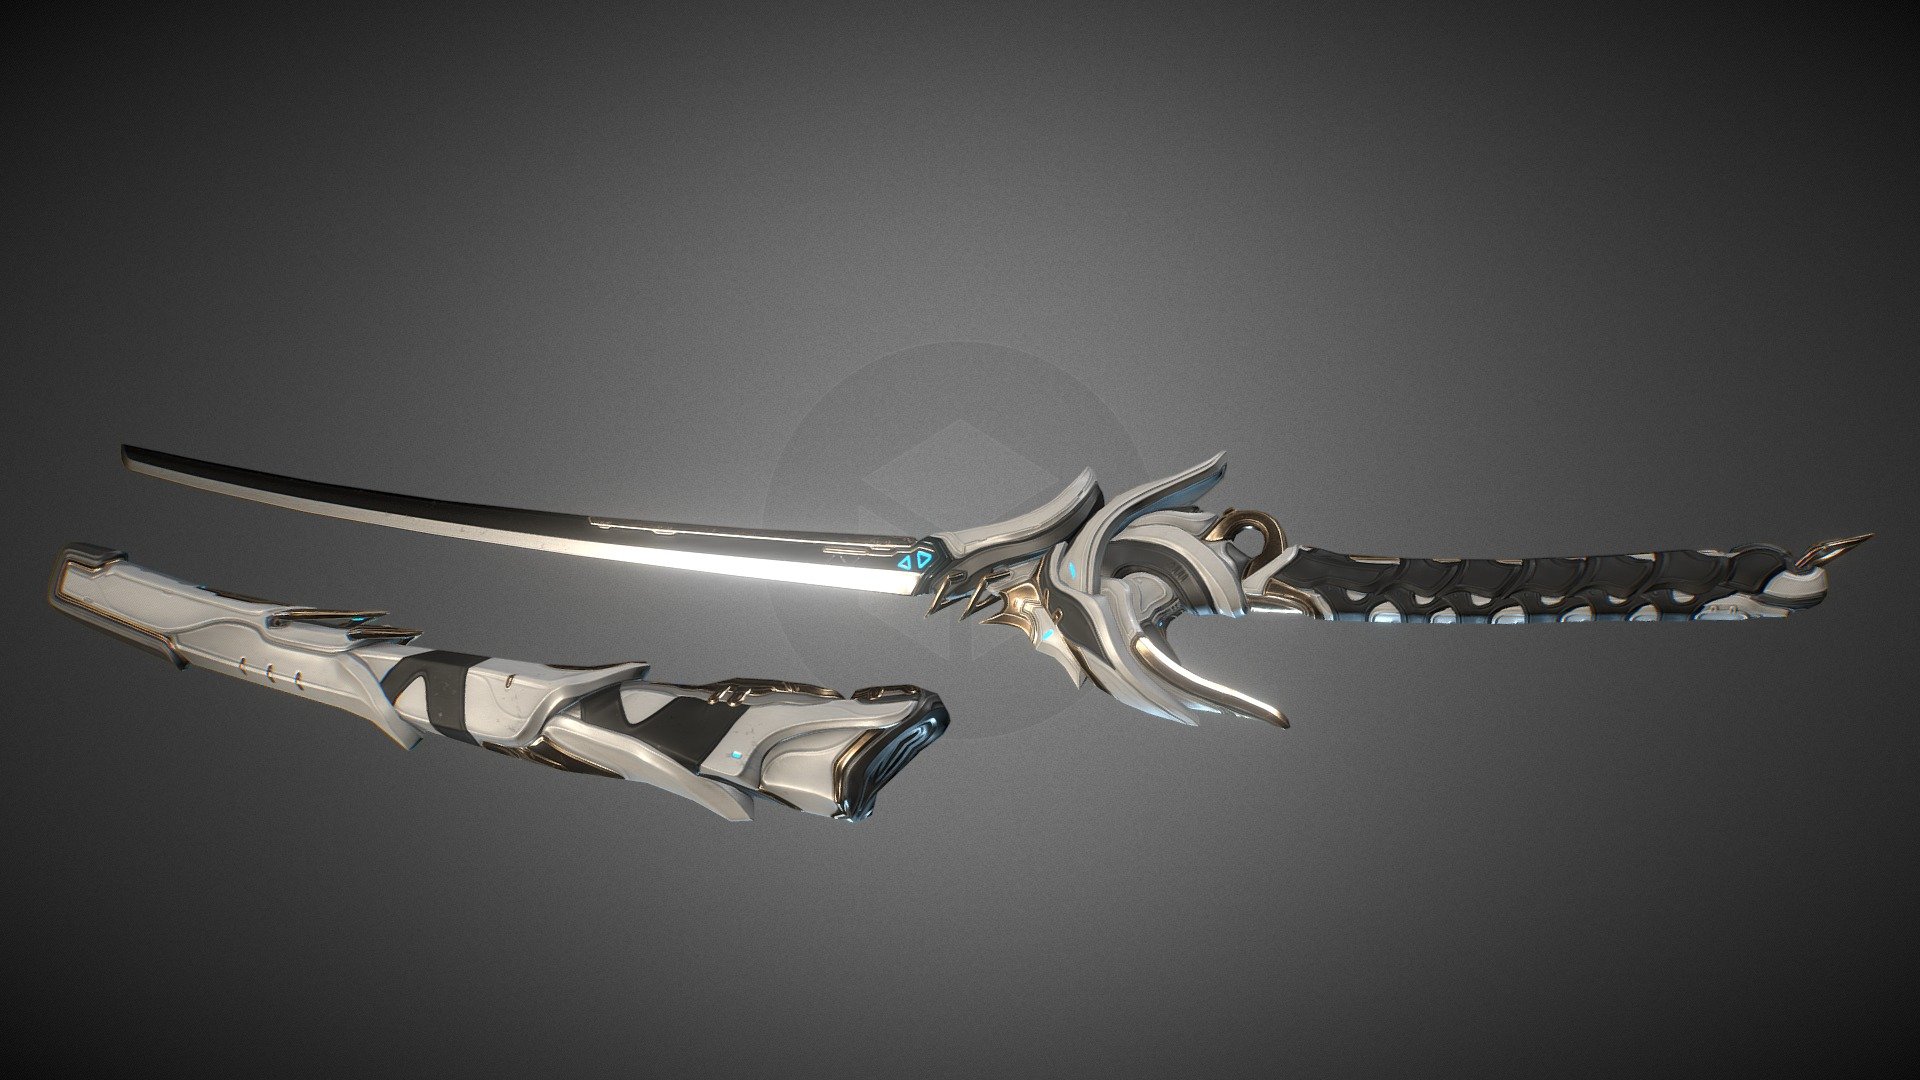 Alternate model for the Katana Weapon in the game Warframe - Digital Extremes. 

Created in collaboration with my colleague Hitsu San.

https://www.artstation.com/artwork/gJPzDG - Warframe - Katana - Shinigami - 3D model by Reil 3d model